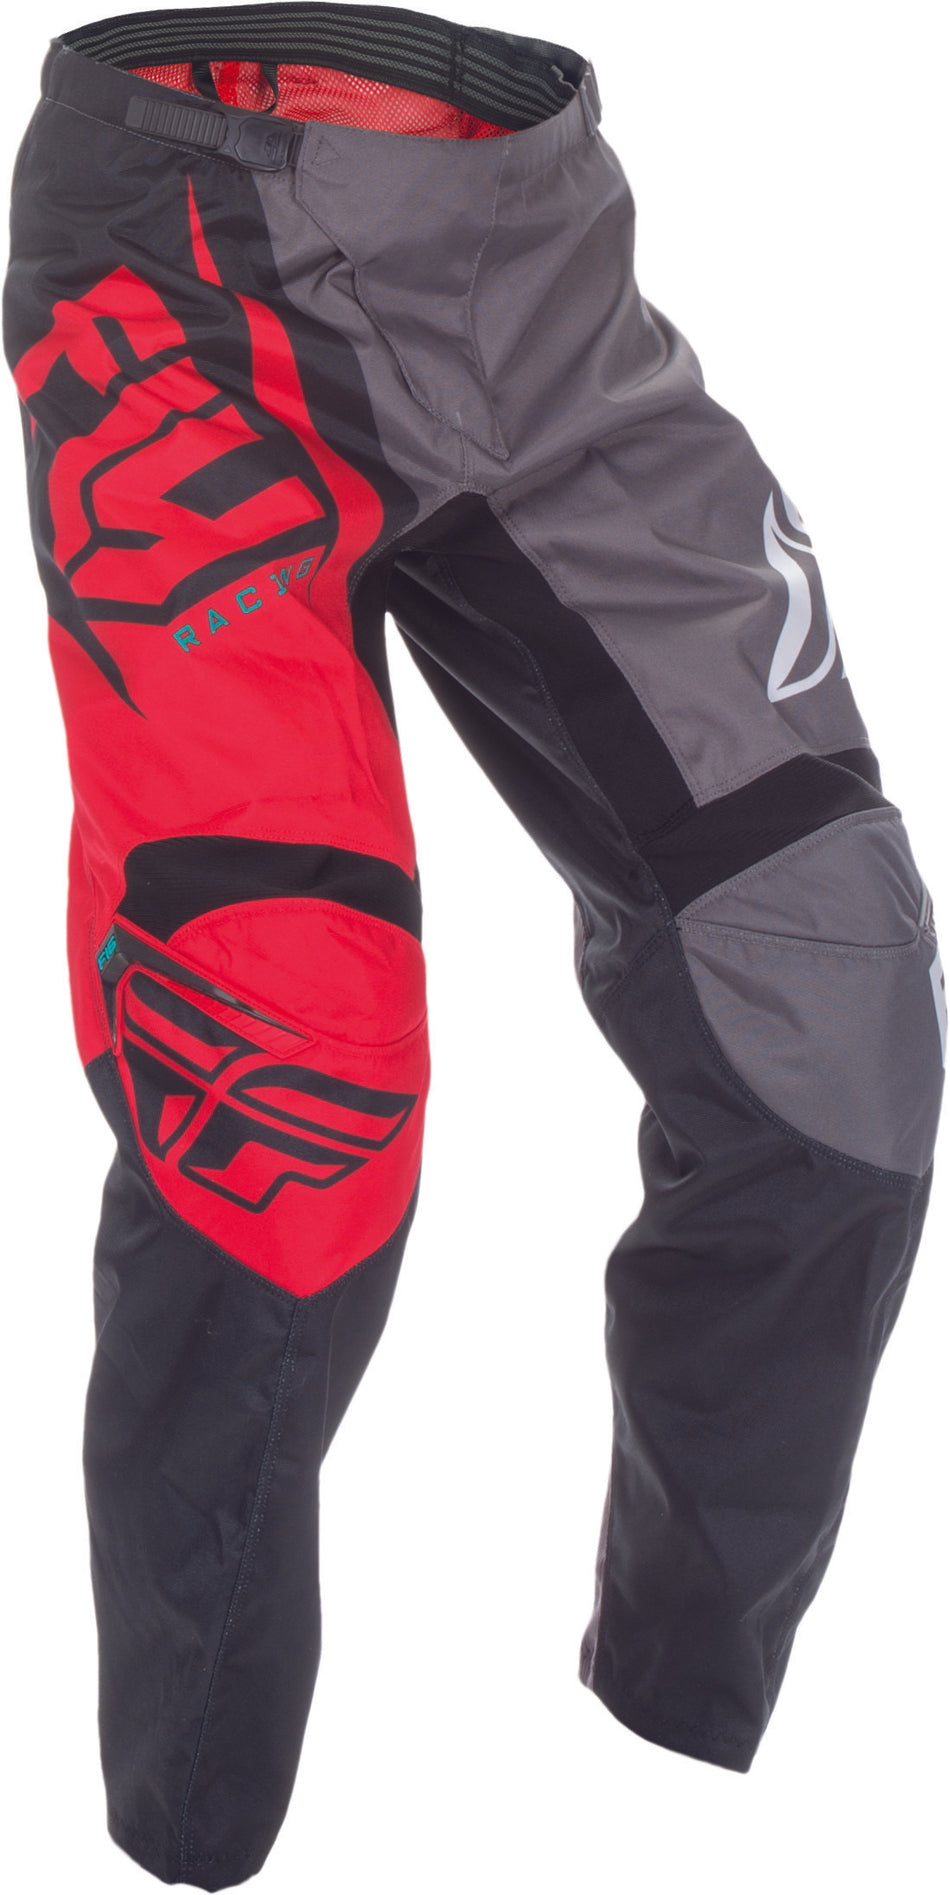 FLY RACING F-16 Pant Red/Black/Grey Sz 34 370-93234